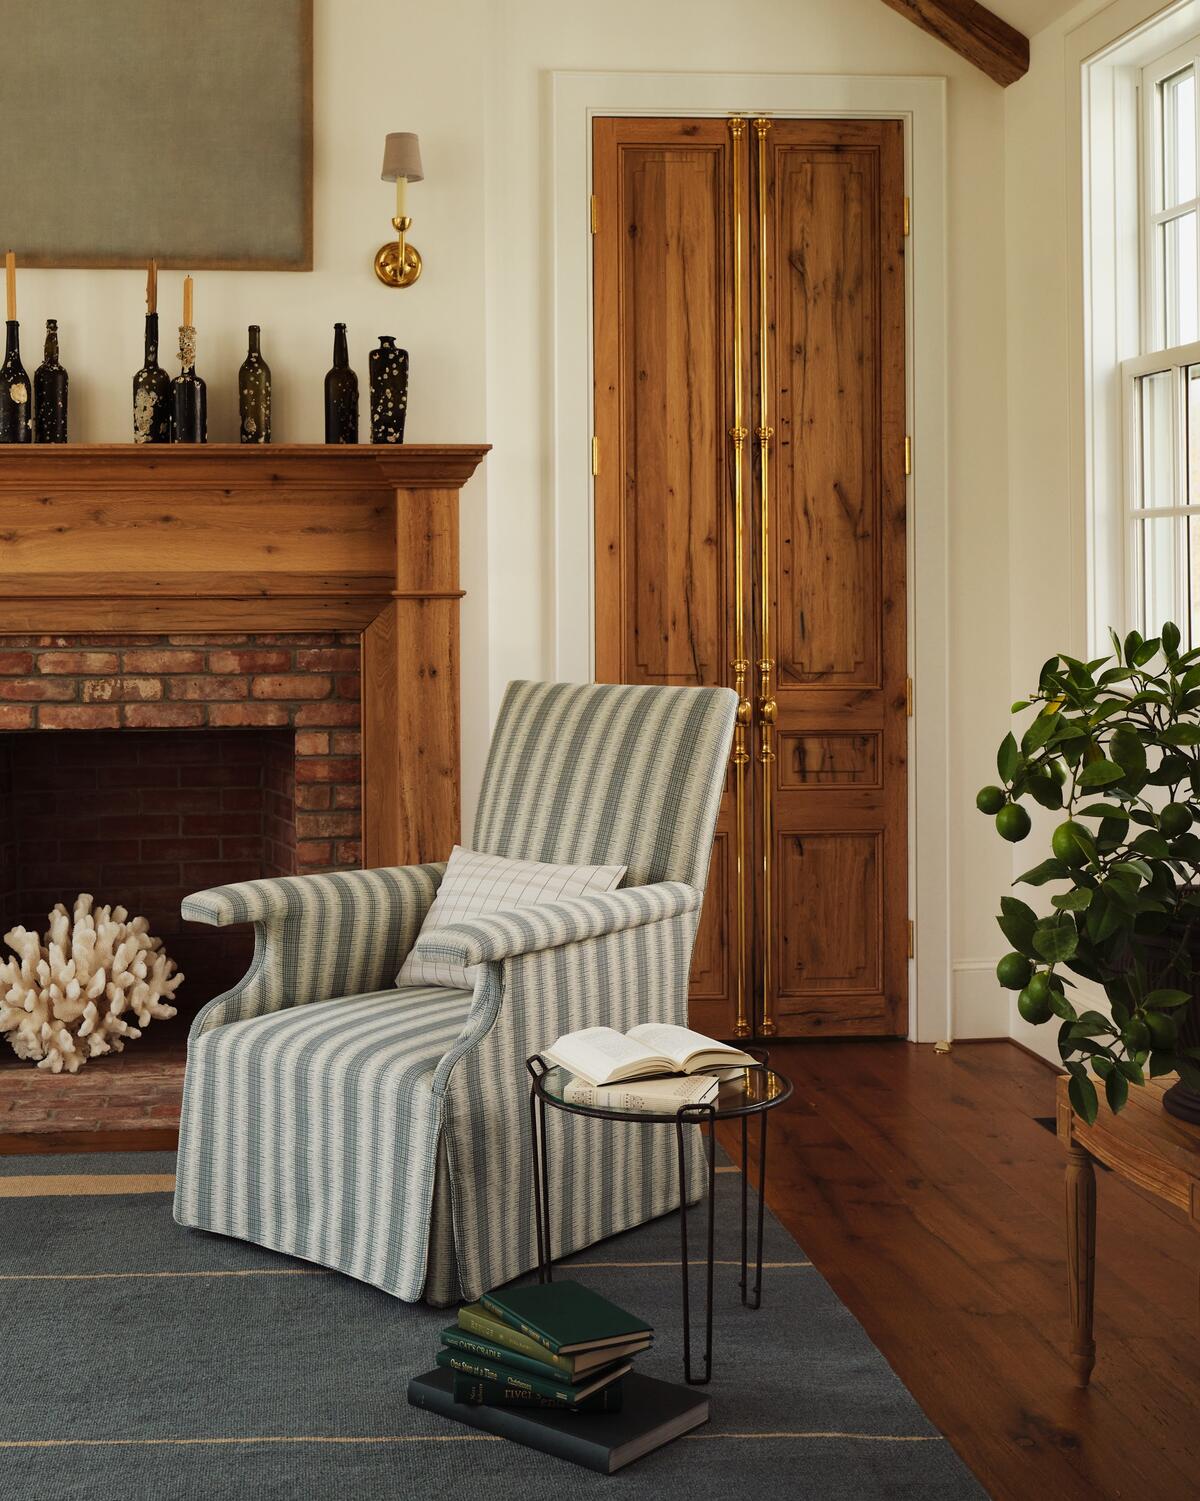 Rose Tarlow returns with a sophisticated second collection for Perennials